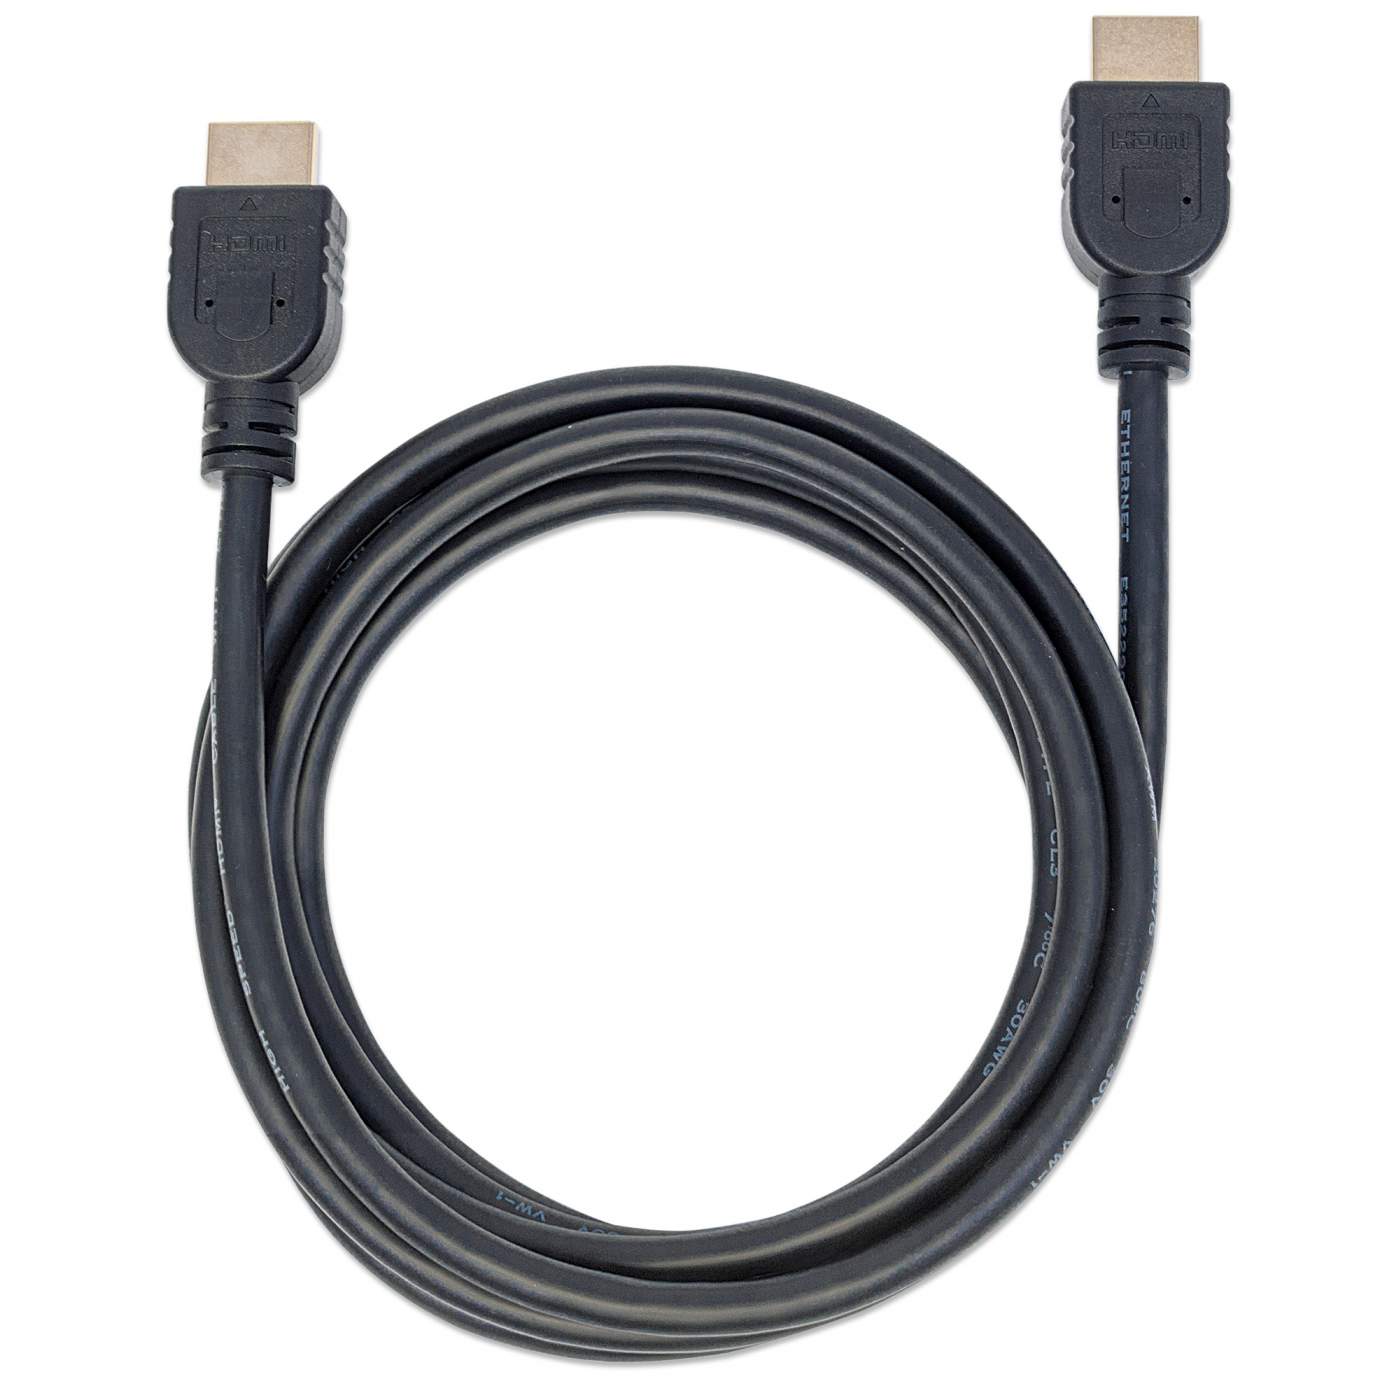 In-wall CL3 High Speed HDMI Cable with Ethernet  Image 6